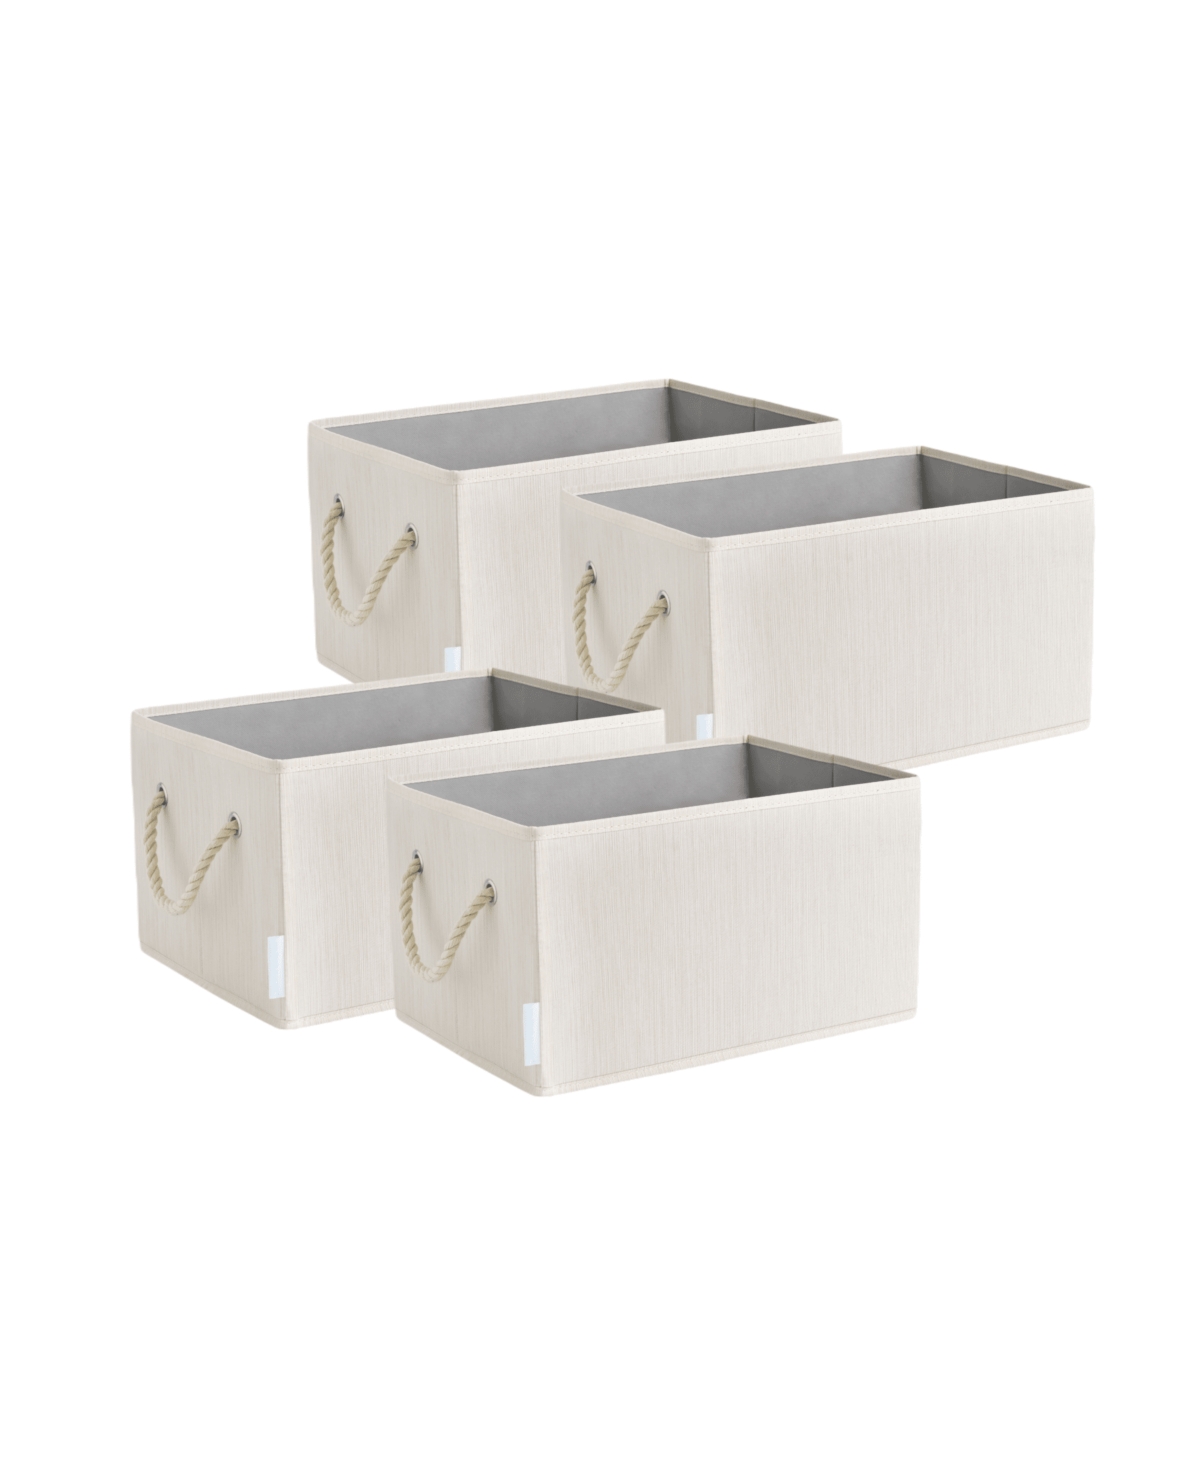 Wethinkstorage 20 Litre Collapsible Fabric Storage Bins With Cotton Rope Handles, Set Of 4 In Ivory